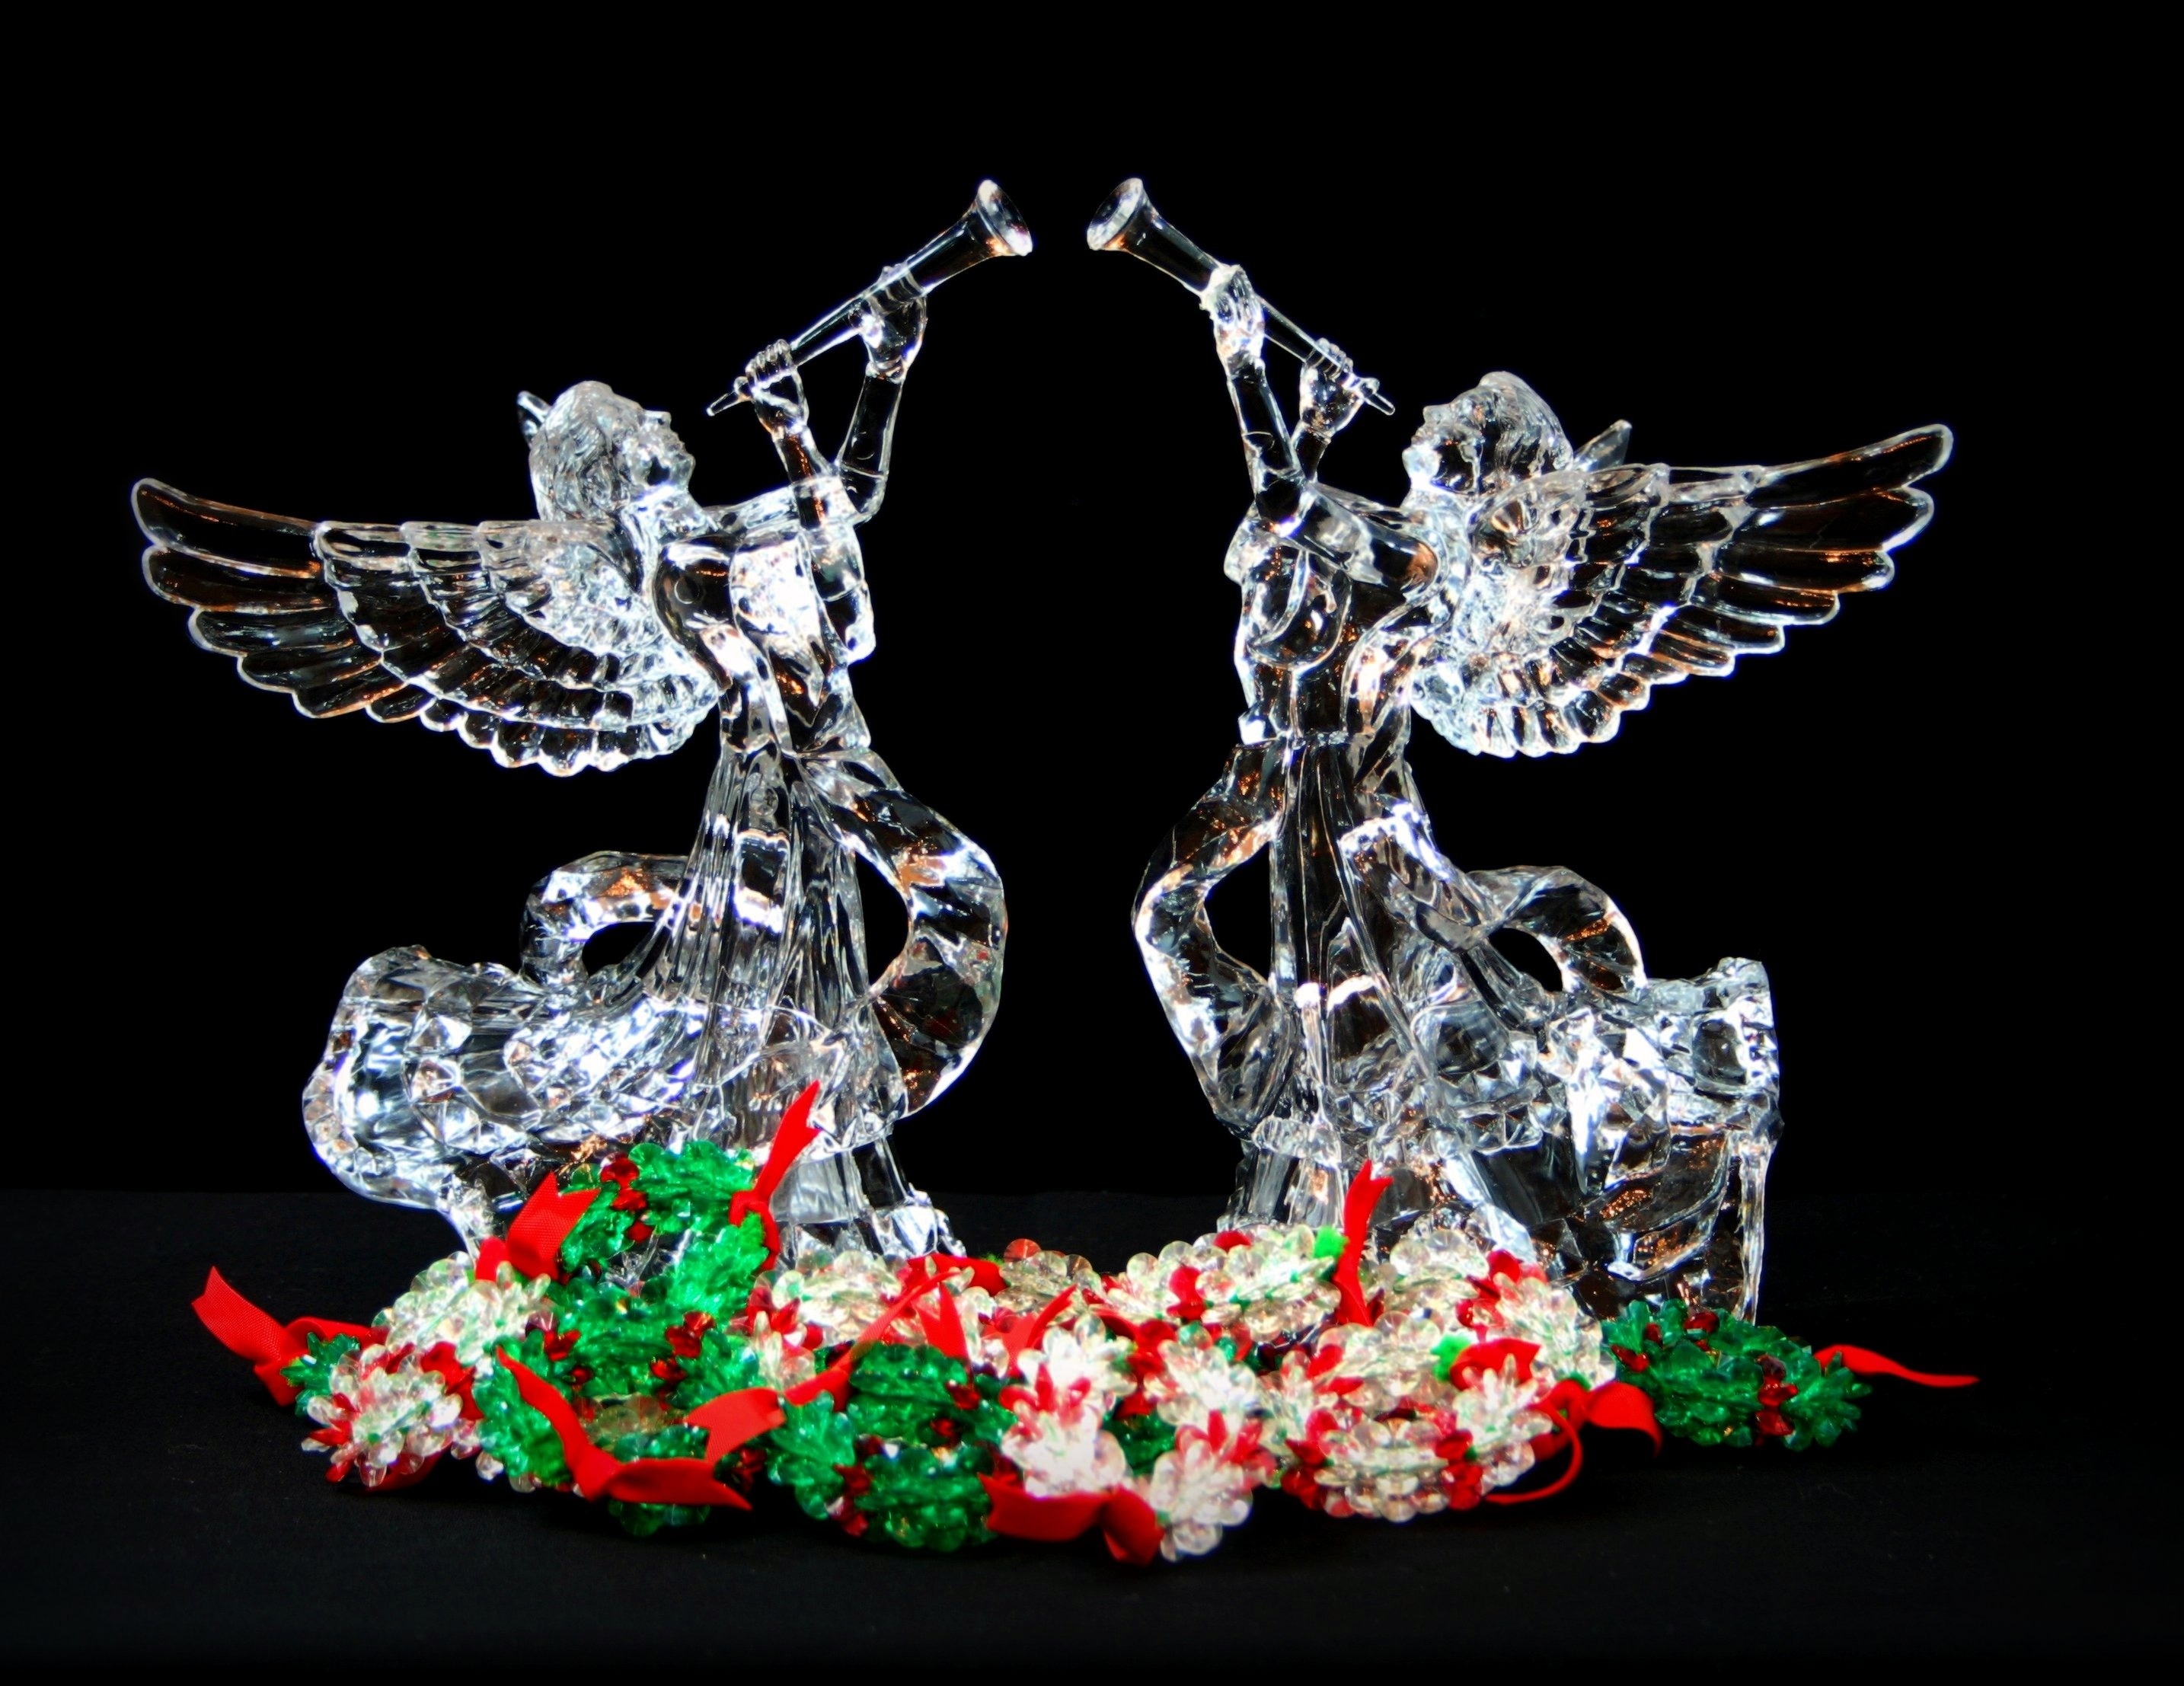 2 clear glass angels figurines